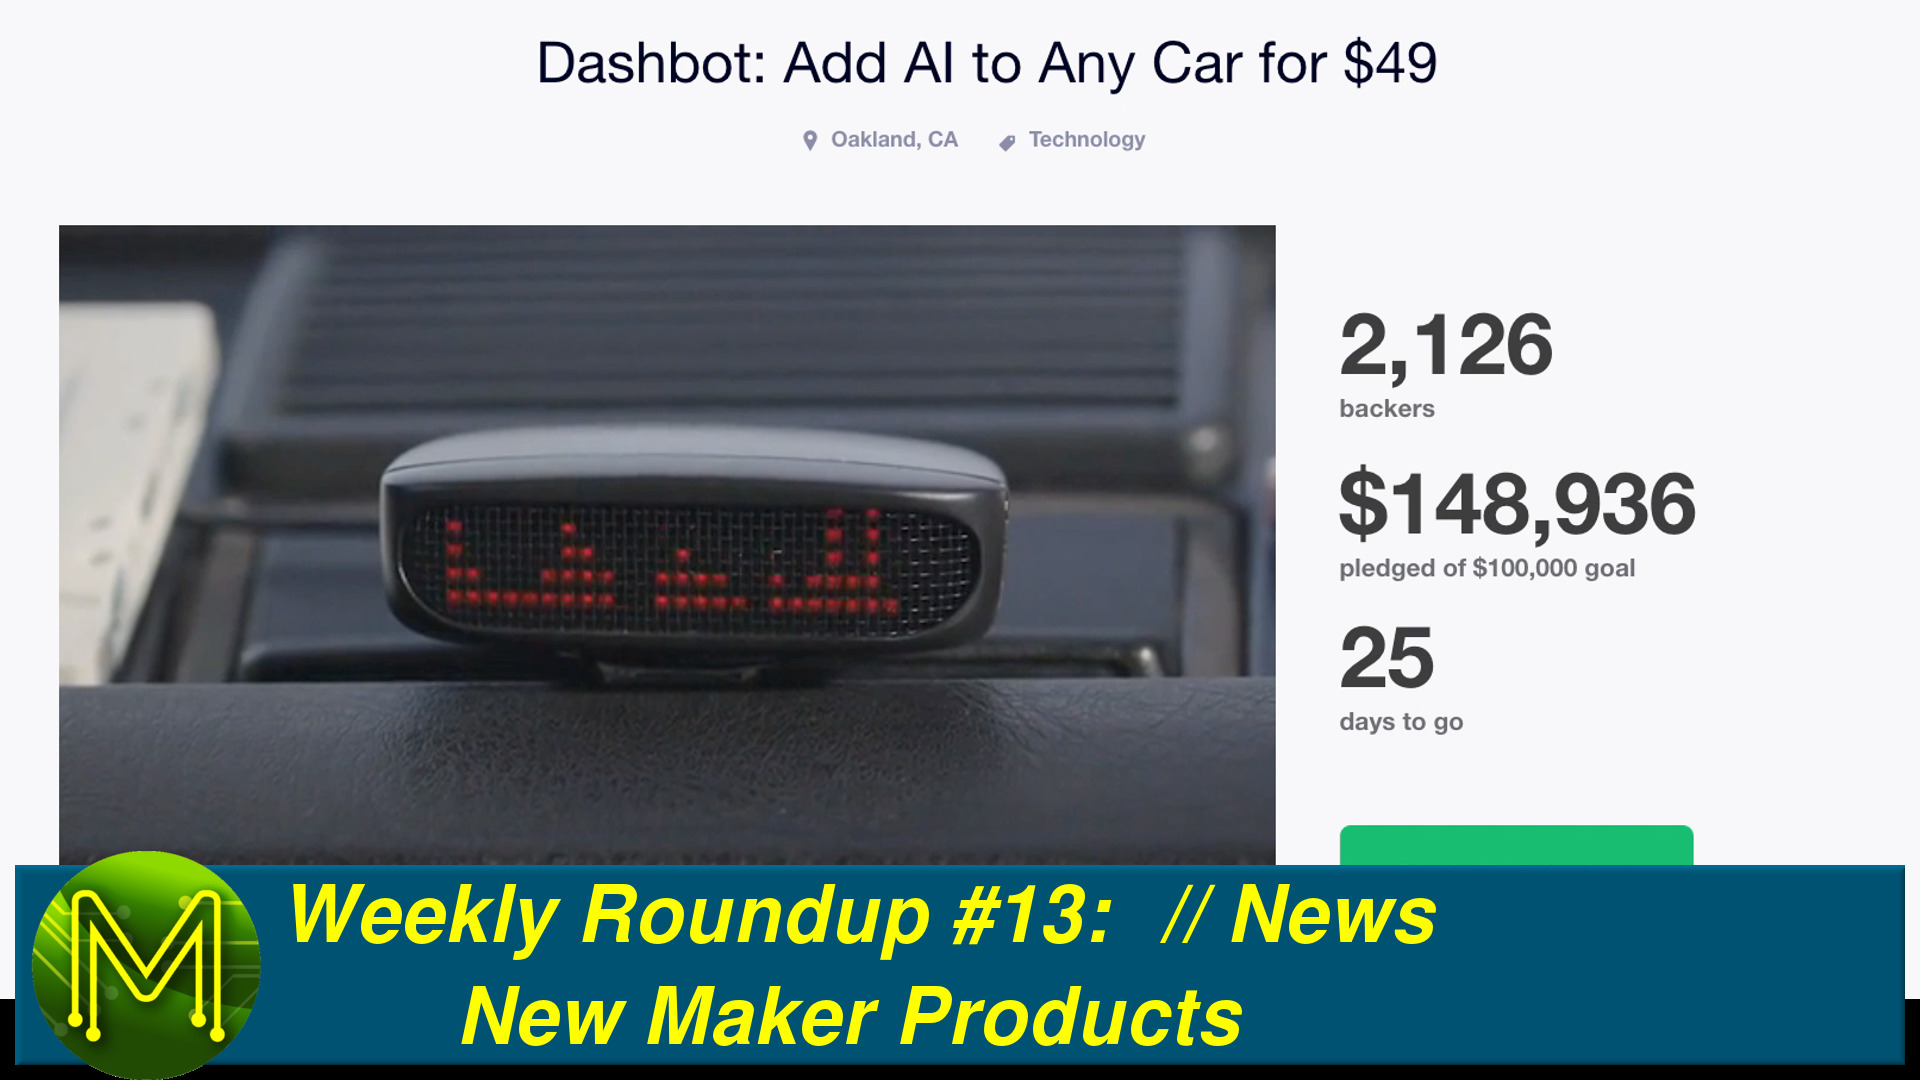 Weekly Roundup #13 - New Maker Products // News